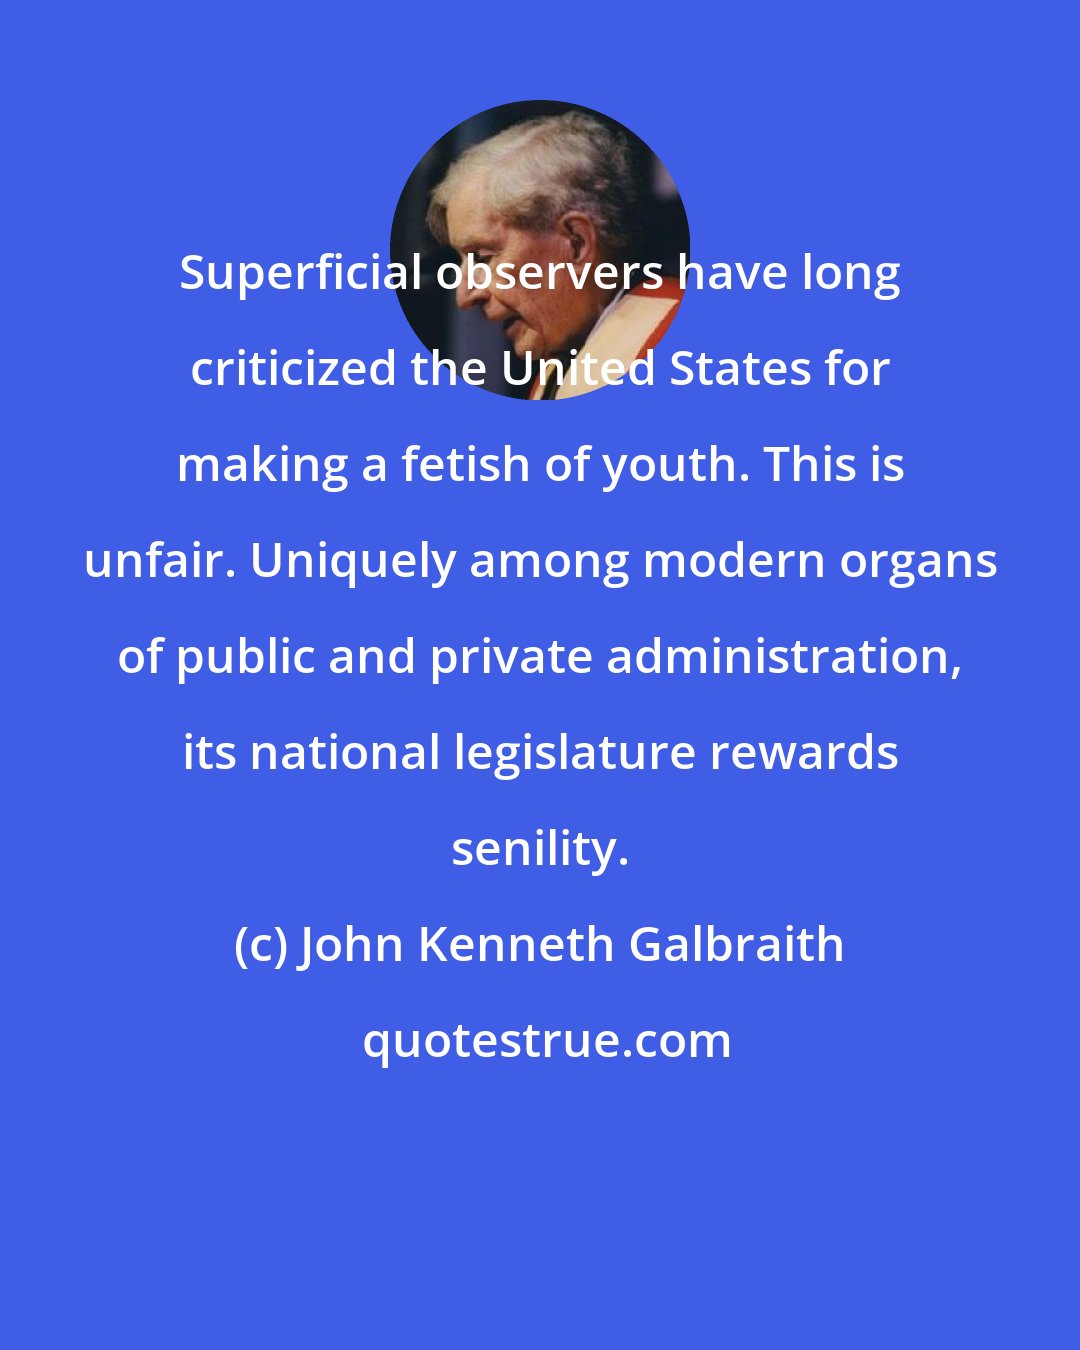 John Kenneth Galbraith: Superficial observers have long criticized the United States for making a fetish of youth. This is unfair. Uniquely among modern organs of public and private administration, its national legislature rewards senility.